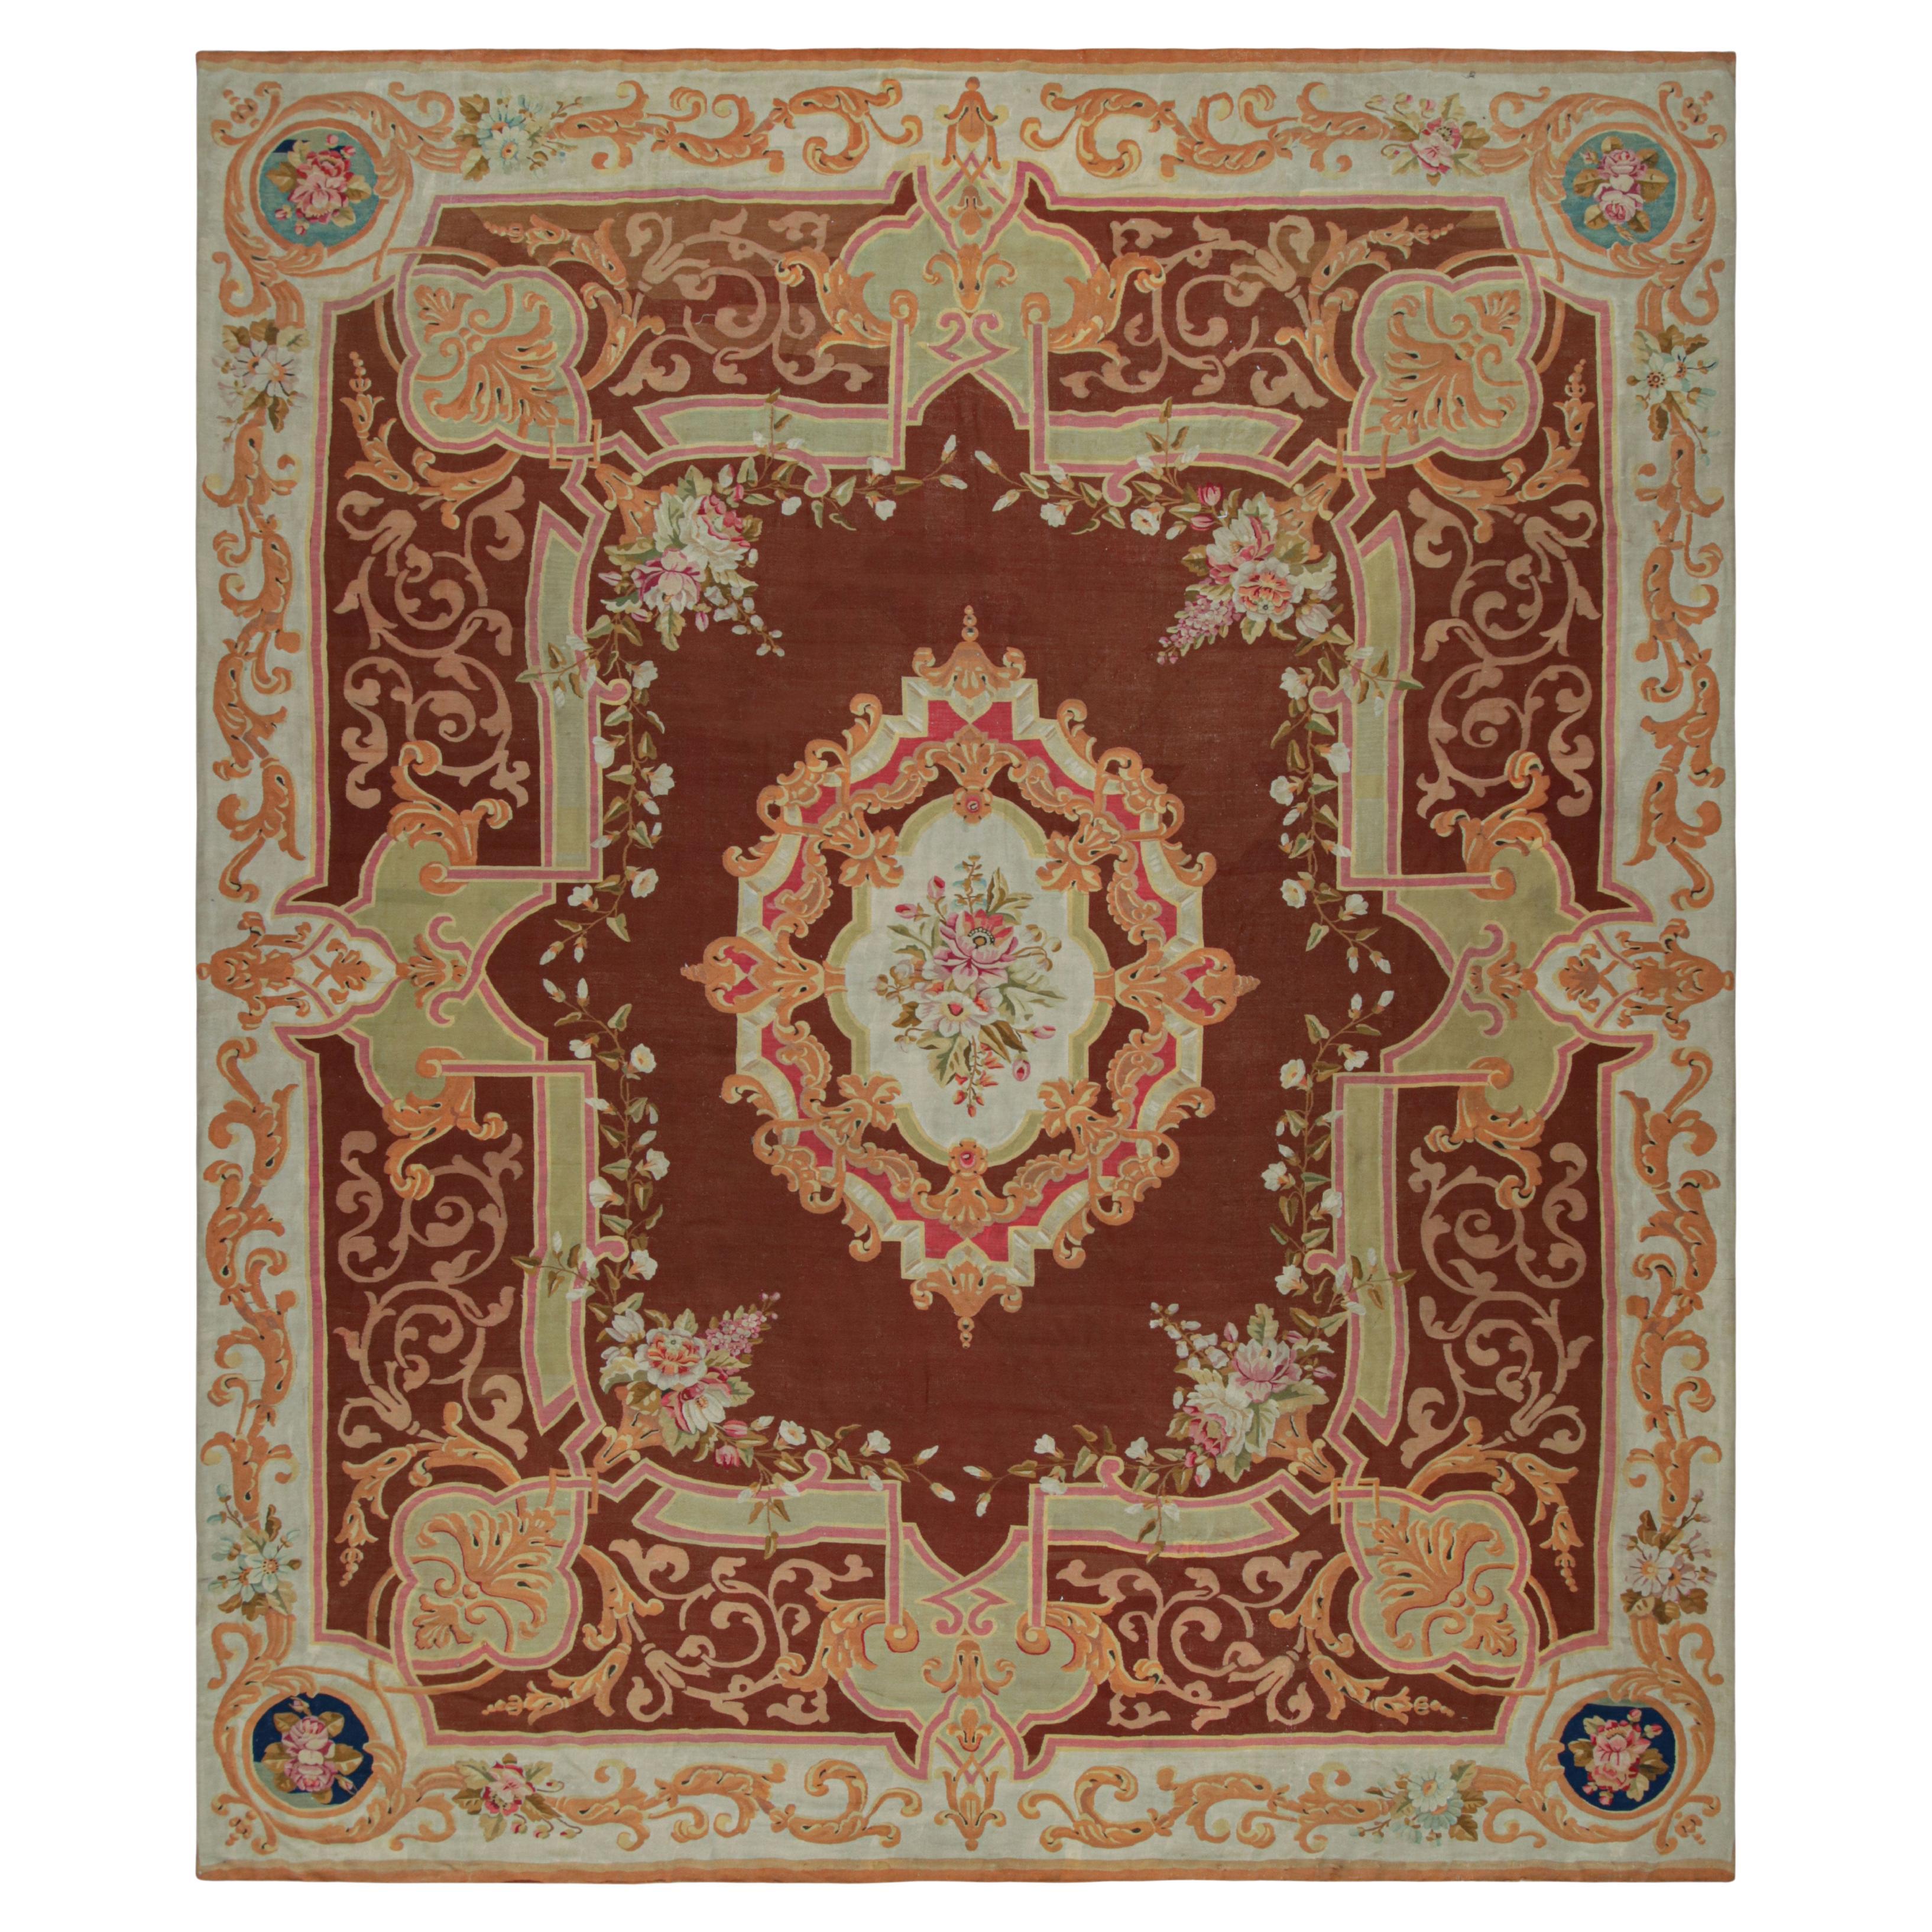 Antique Aubusson Rug in Brown with Floral Medallion